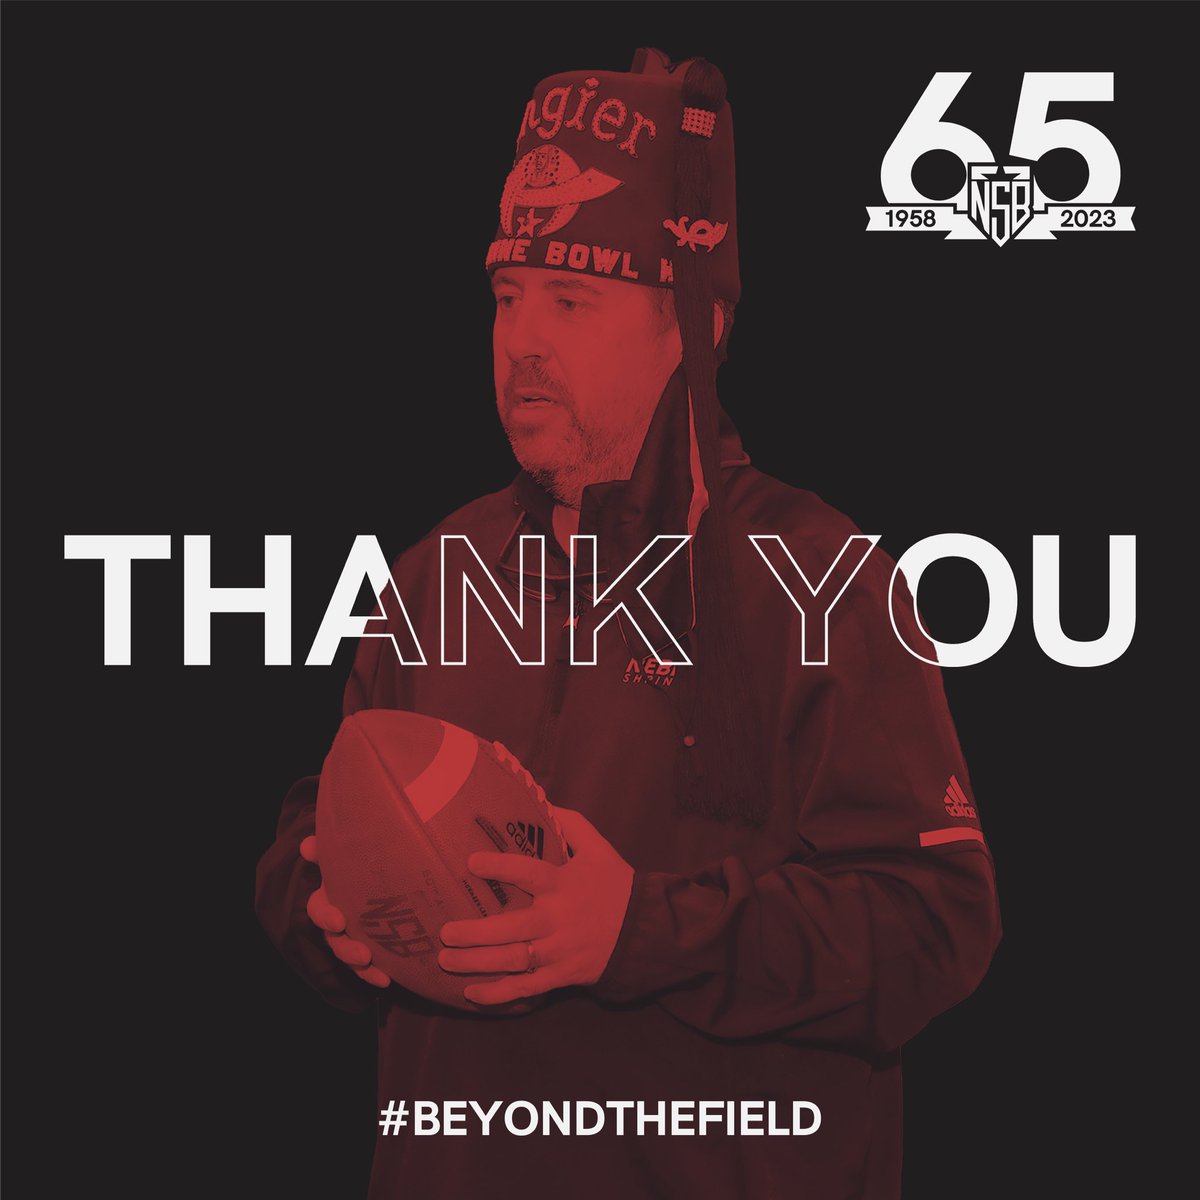 #NSB65 is Dave’s last. His impact has gone #BeyondTheField, raising money for children, helping players become men, and improving the experience of all who’ve attended the game. No thank you can possibly do justice to a man who has given so much to so many, but thank you Dave.